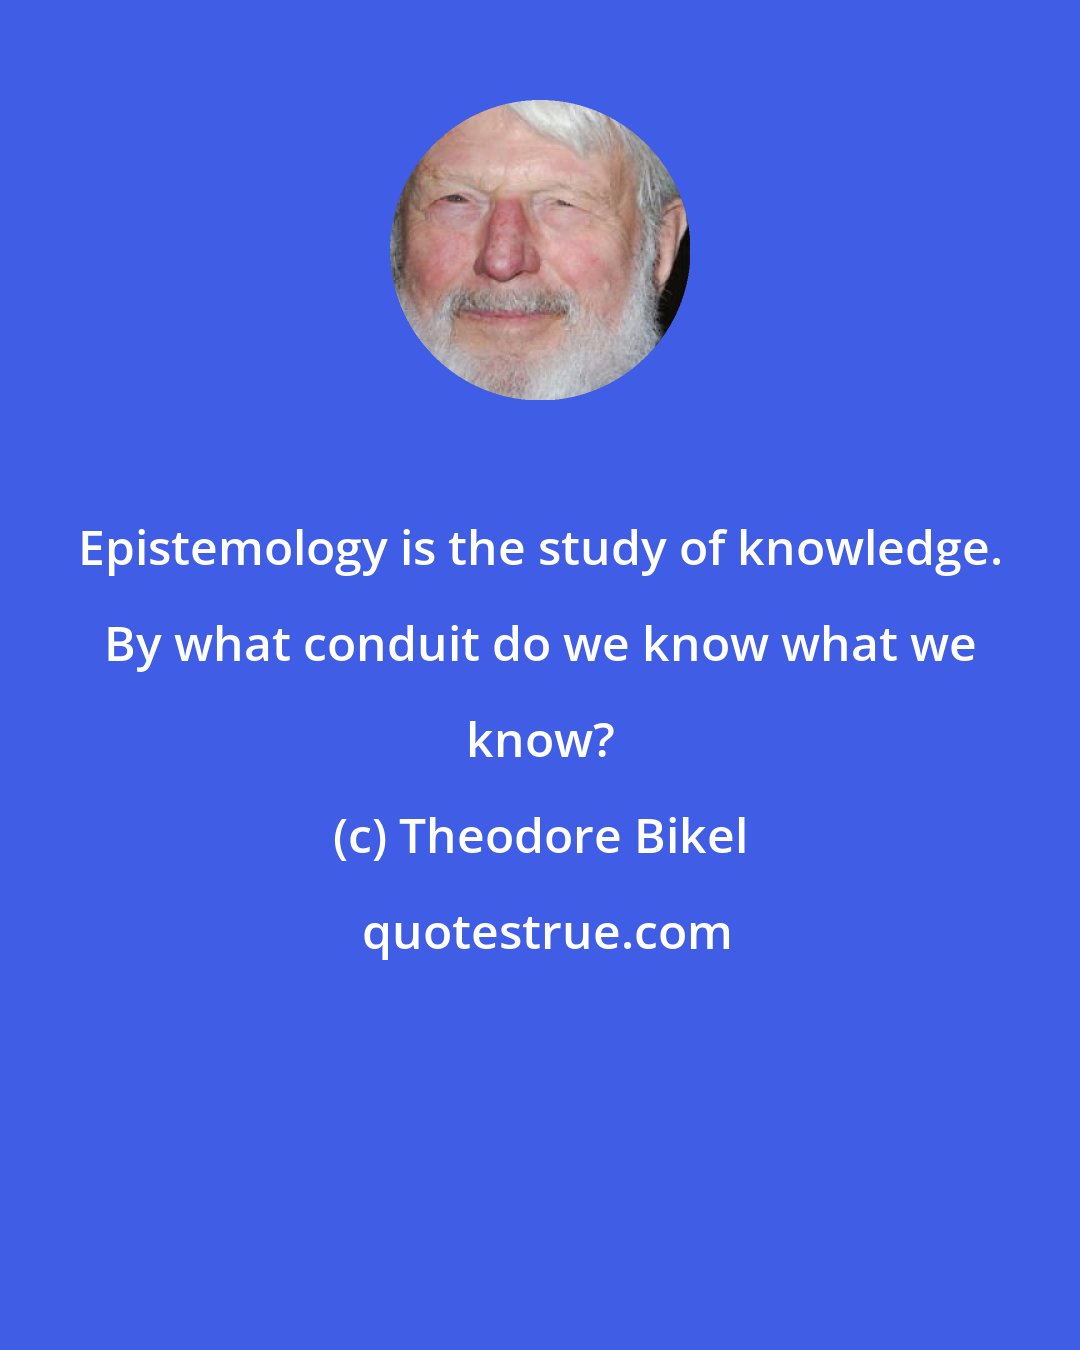 Theodore Bikel: Epistemology is the study of knowledge. By what conduit do we know what we know?